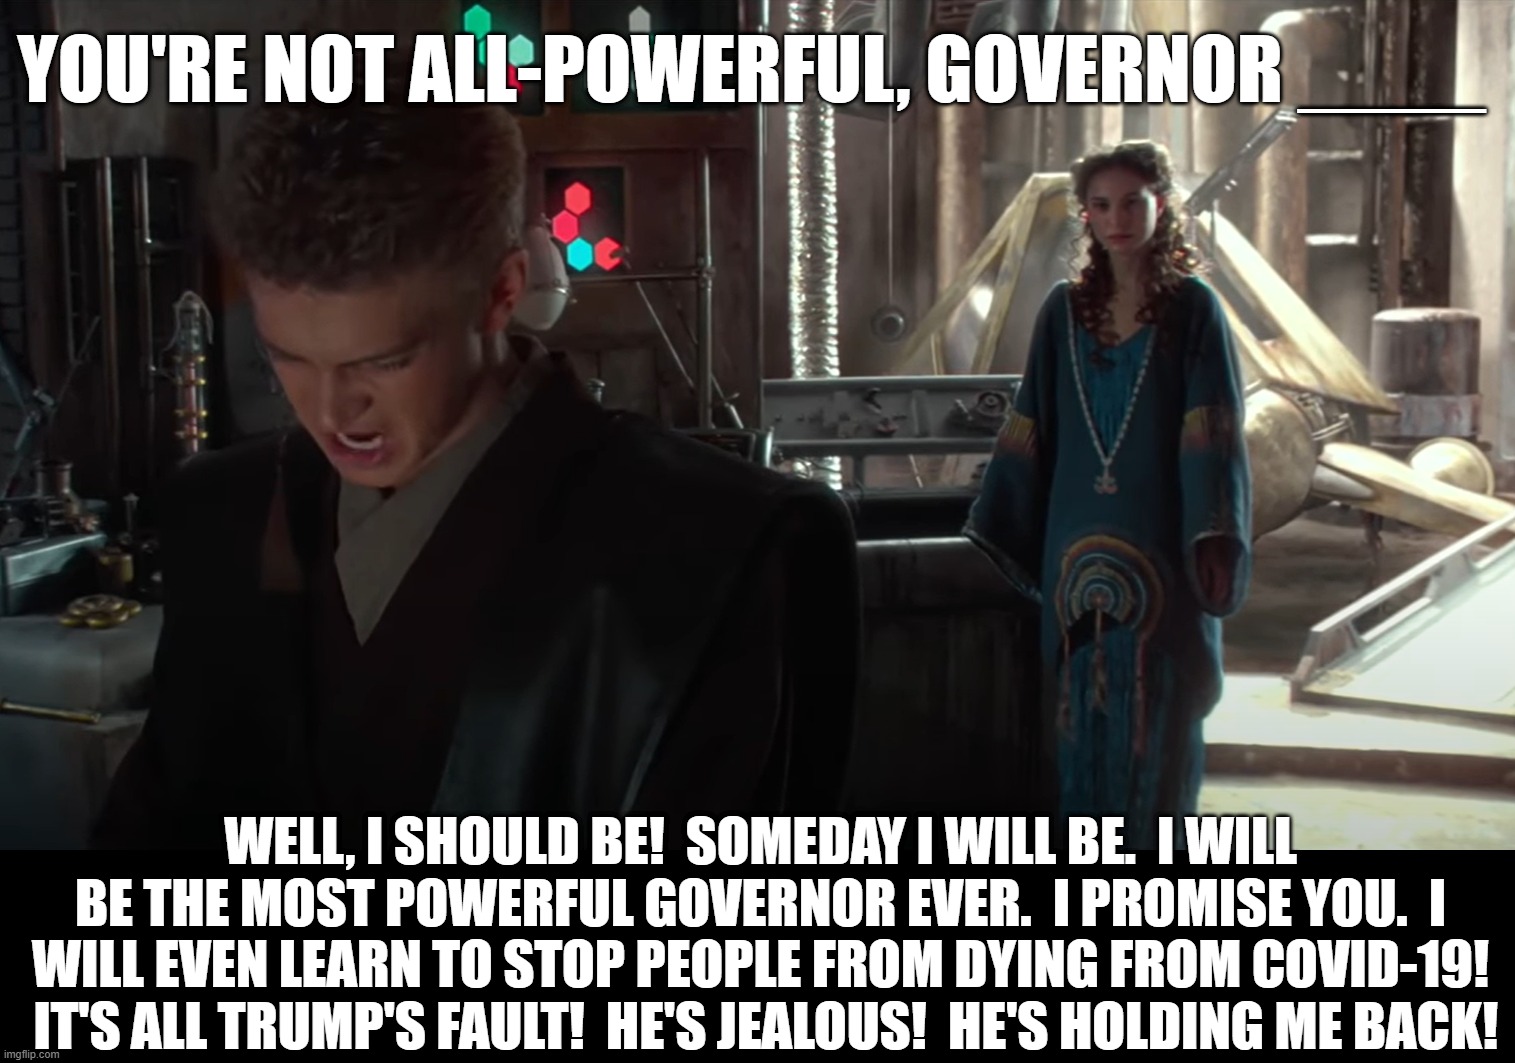 You're not all-powerful Governor | YOU'RE NOT ALL-POWERFUL, GOVERNOR ____; WELL, I SHOULD BE!  SOMEDAY I WILL BE.  I WILL BE THE MOST POWERFUL GOVERNOR EVER.  I PROMISE YOU.  I WILL EVEN LEARN TO STOP PEOPLE FROM DYING FROM COVID-19!  IT'S ALL TRUMP'S FAULT!  HE'S JEALOUS!  HE'S HOLDING ME BACK! | image tagged in covid-19,governor,donald trump,star wars,anakin skywalker | made w/ Imgflip meme maker